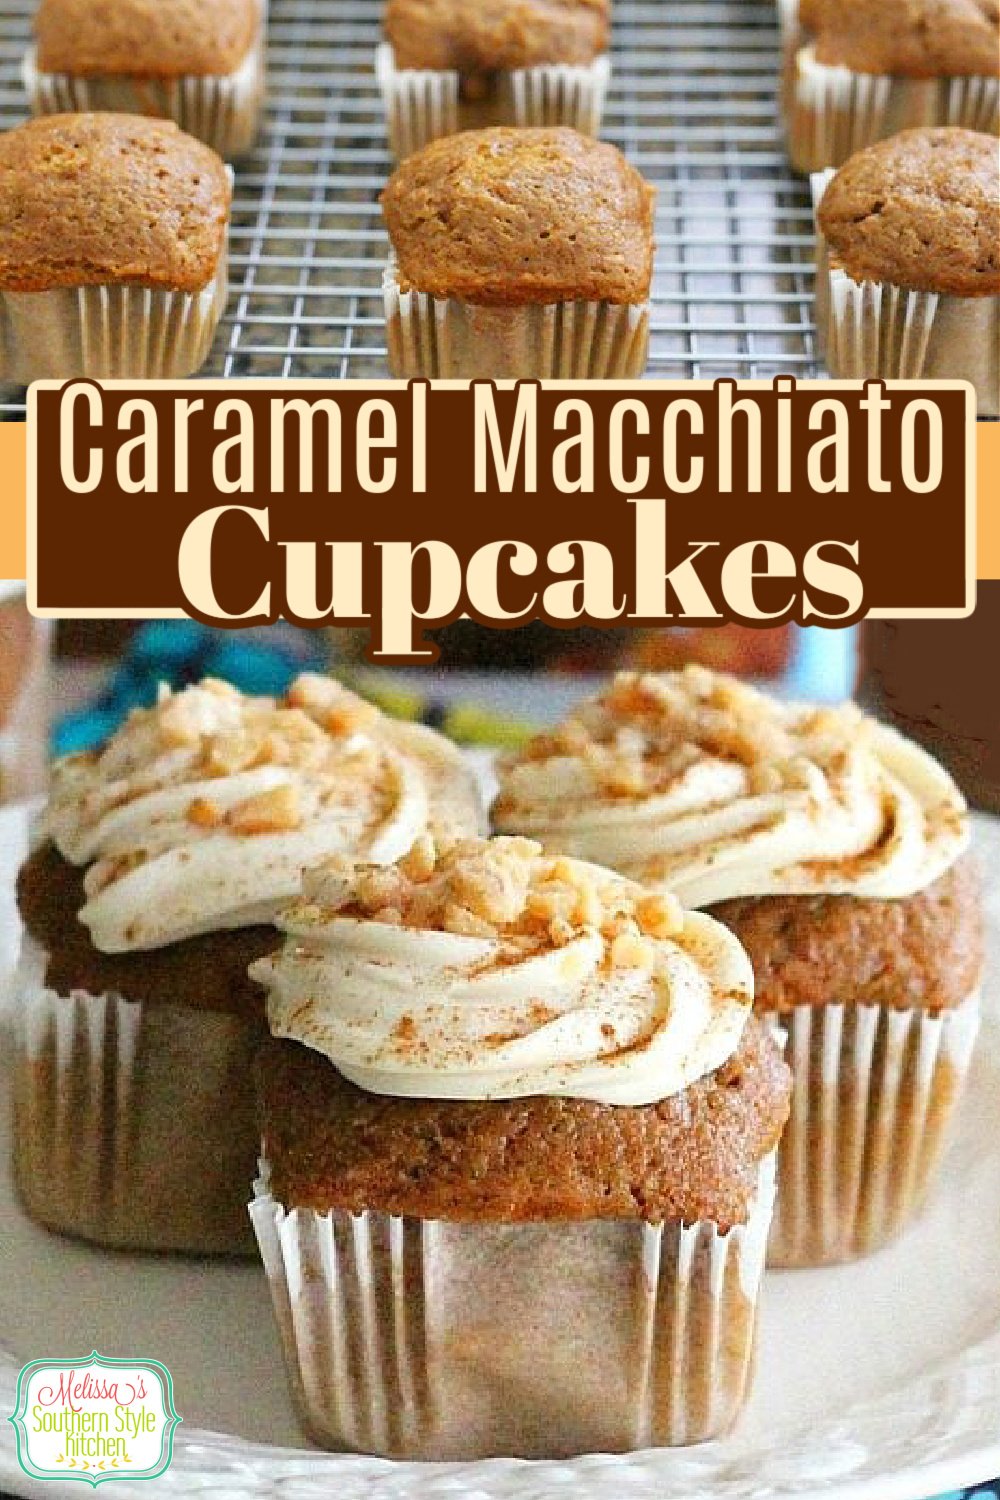 Start your day with these scrumptious Caramel Macchiato Cupcakes with cream cheese frosting #cupcakes #caramelmacchiato #coffeecake #muffins #muffinrecipes #caramel #cakes #desserts #brunch #breakfast #southernfood #southernrecipes via @melissasssk